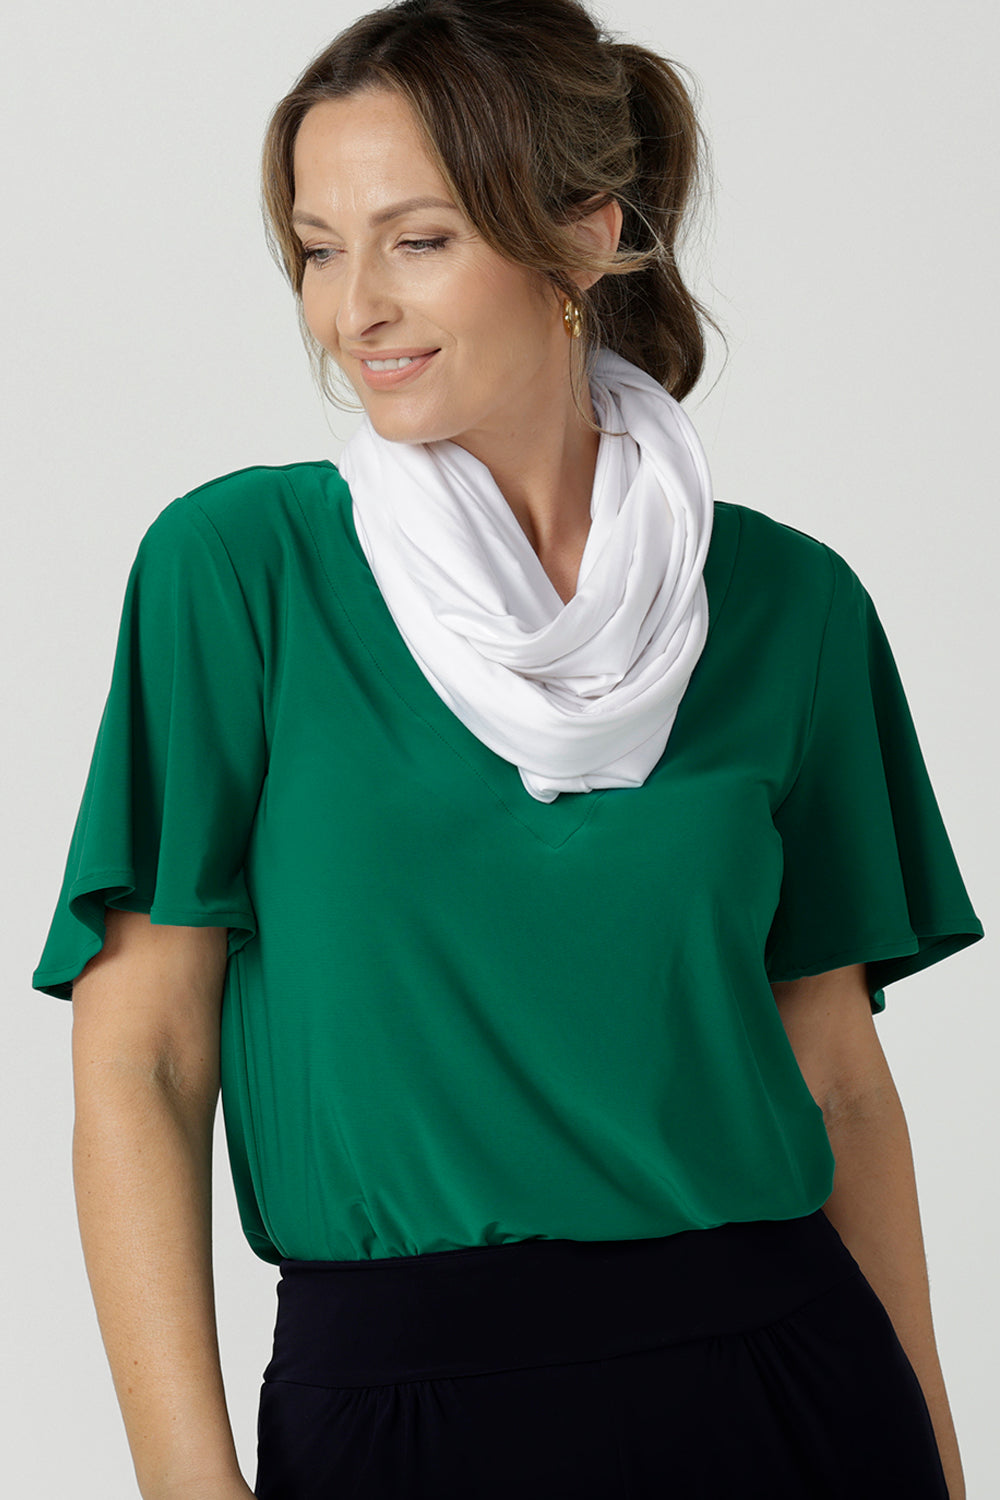 complete your capsule wardrobe for work, travel and play with this Infinity Scarf in luxurious and soft white bamboo jersey.